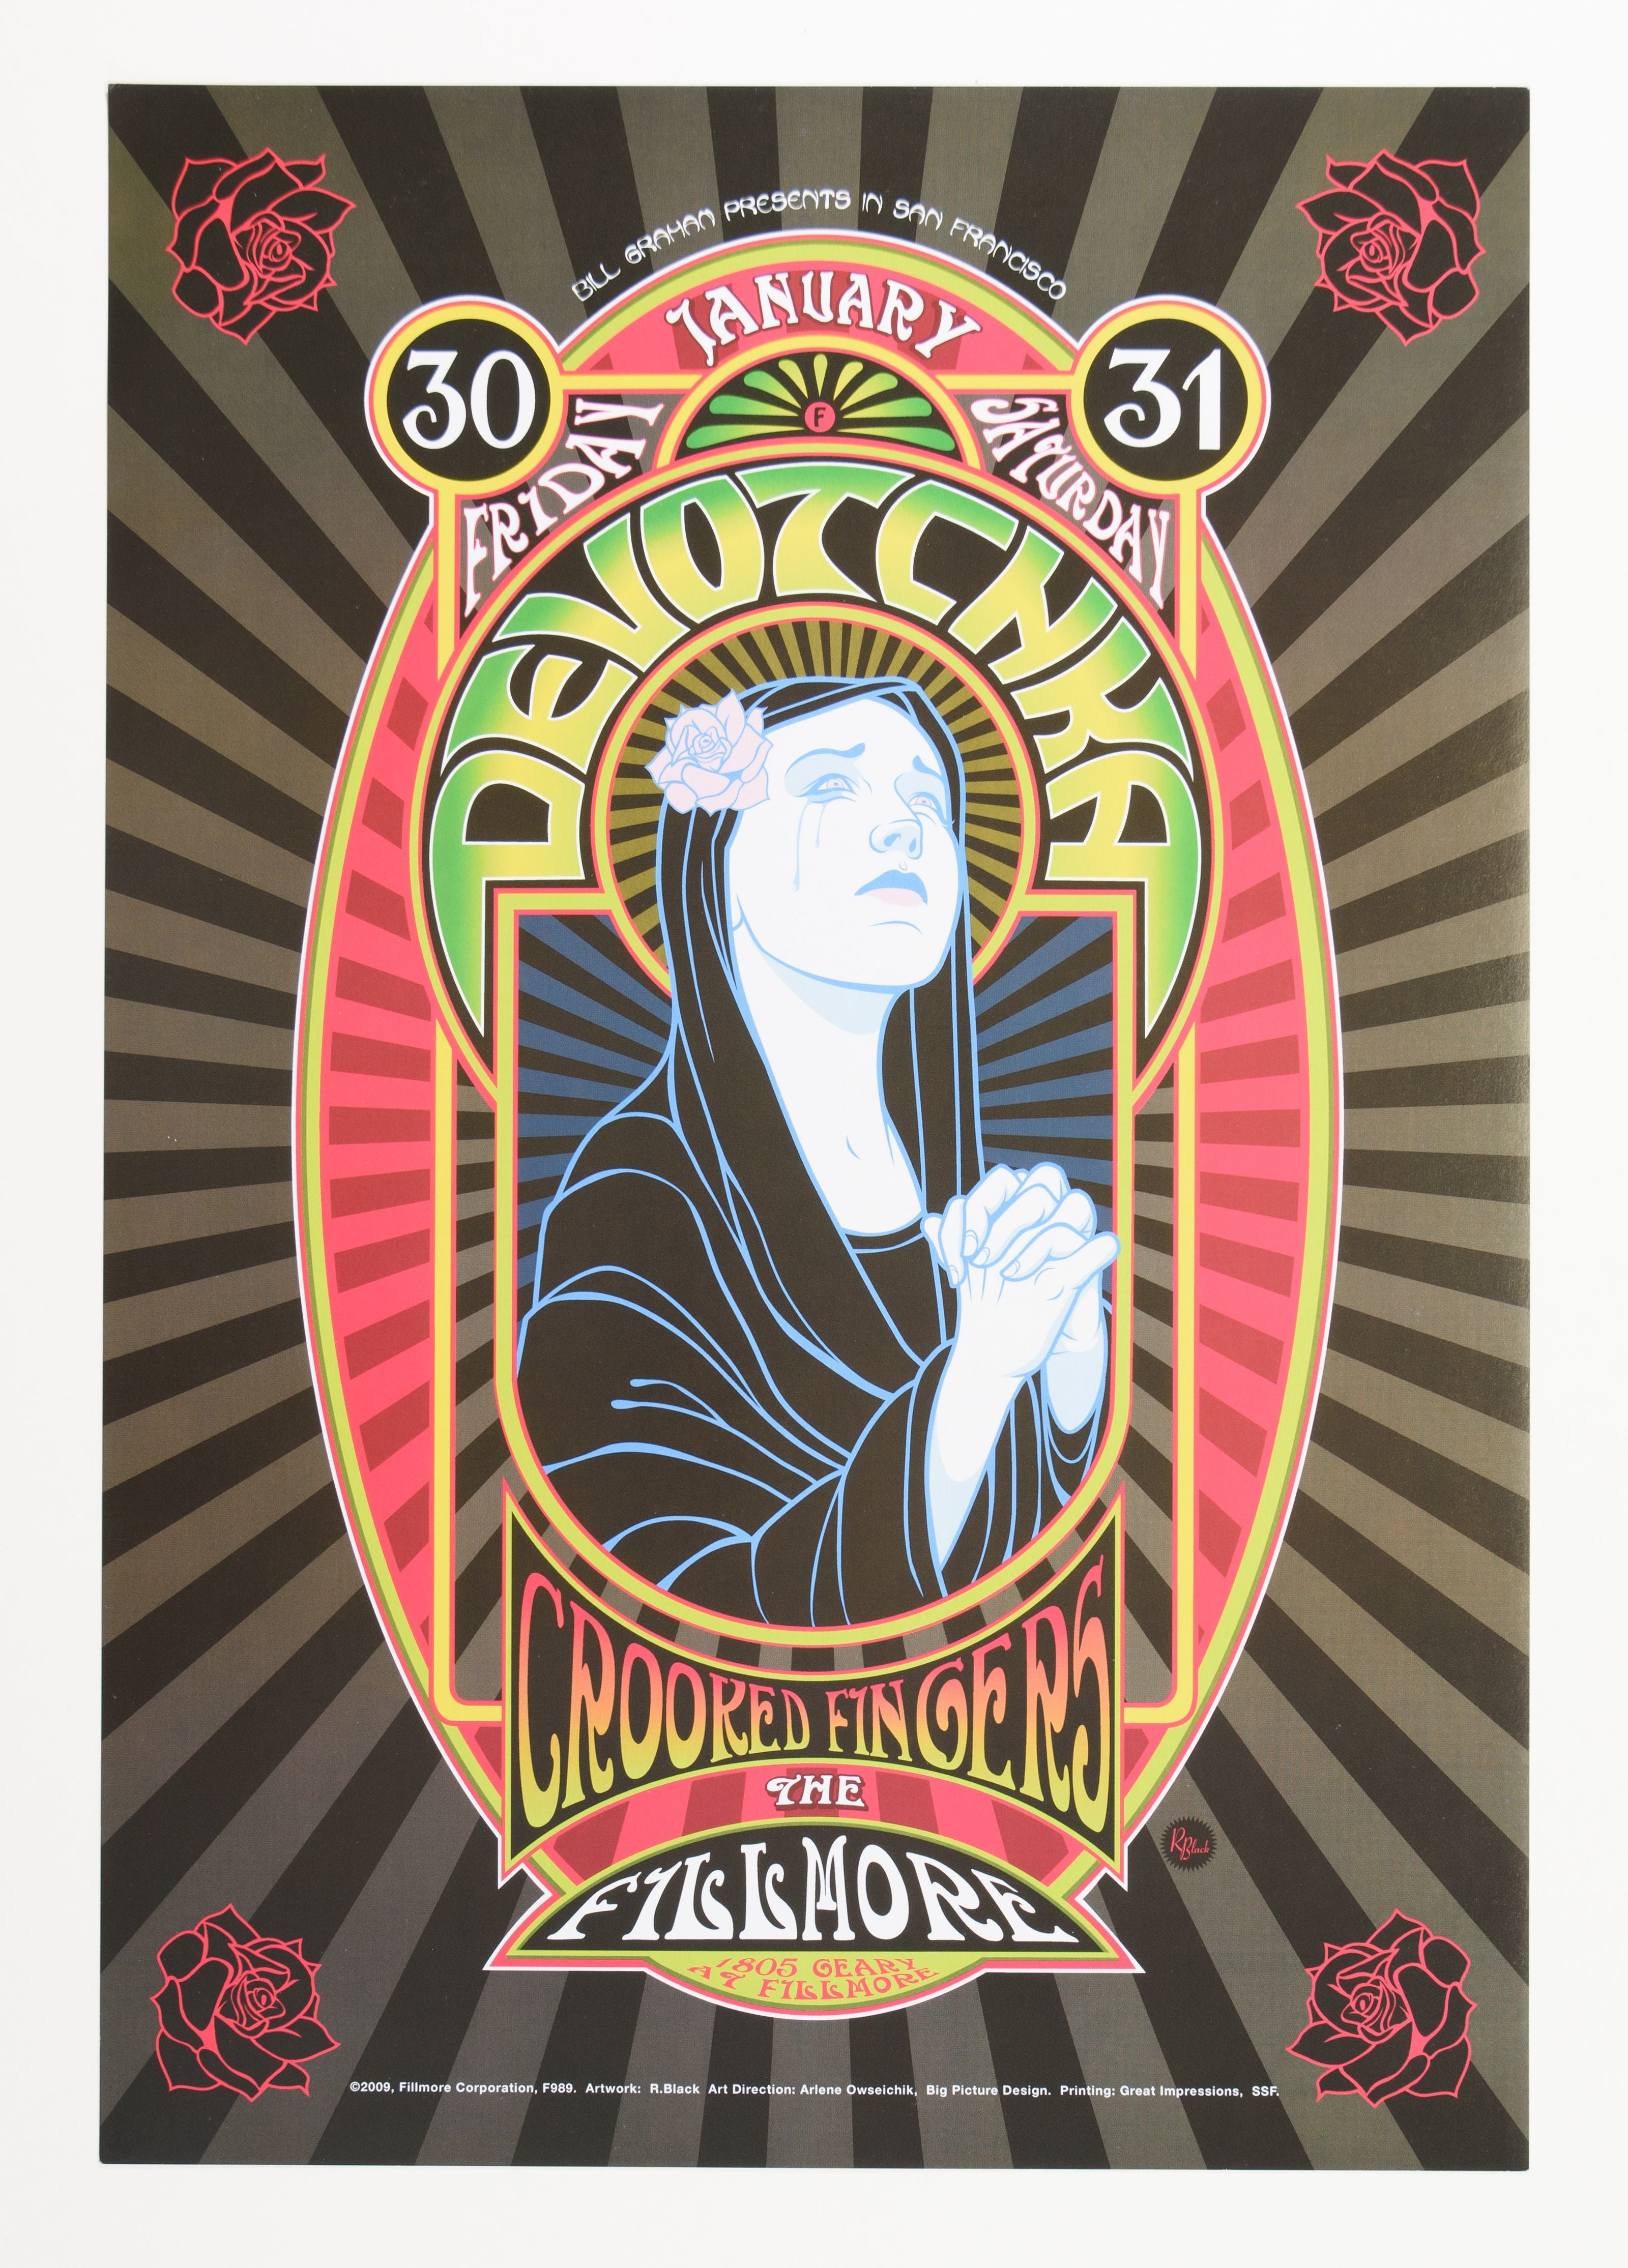 Psychedelic Art Exchange   |   Collectible Posters and Memorabilia